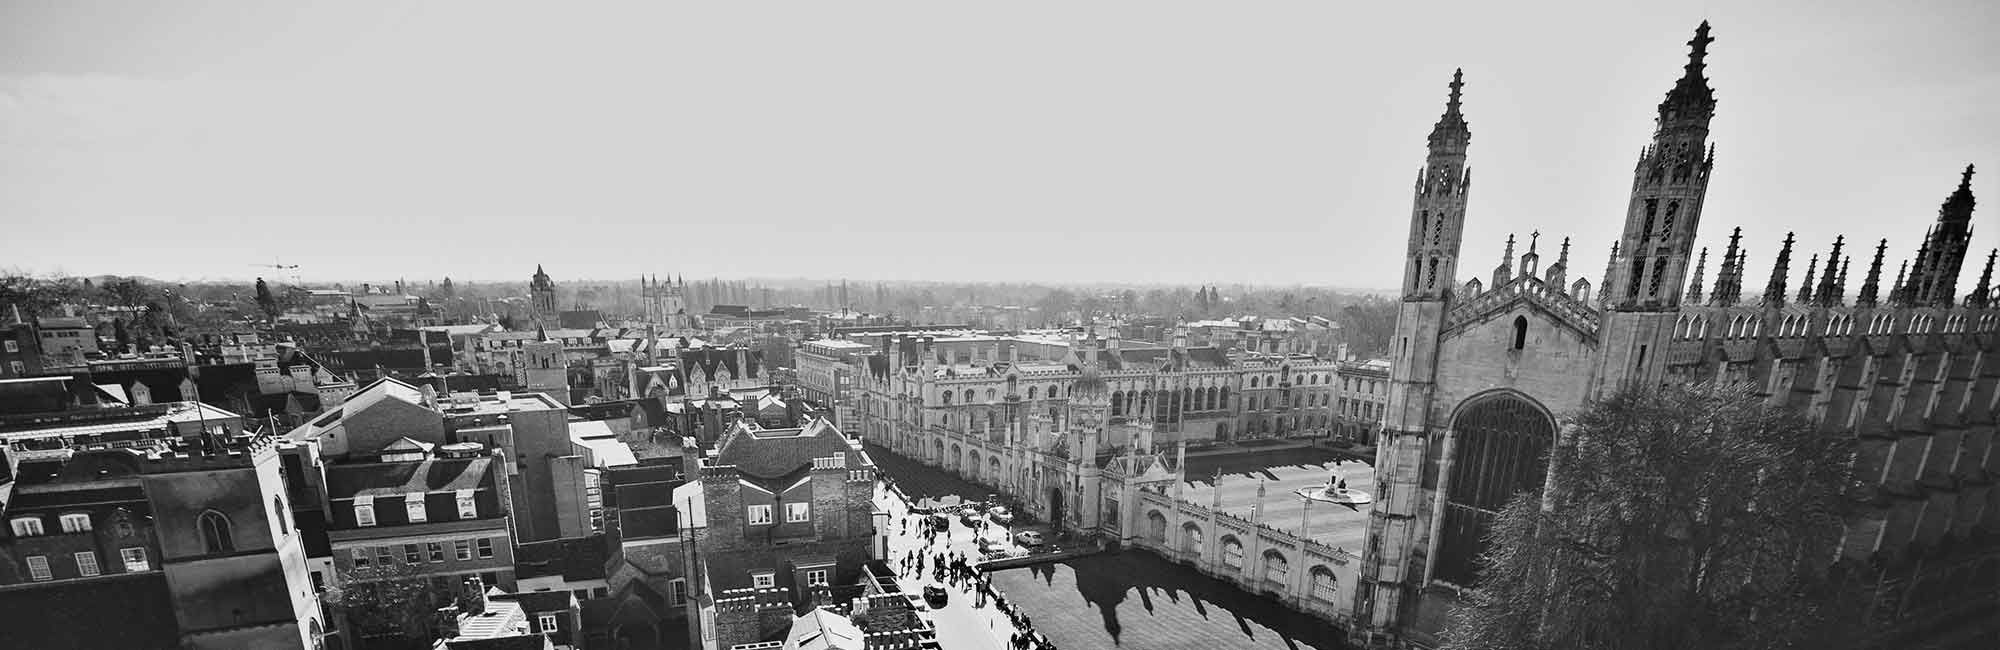 university aerial view from the south in black and white